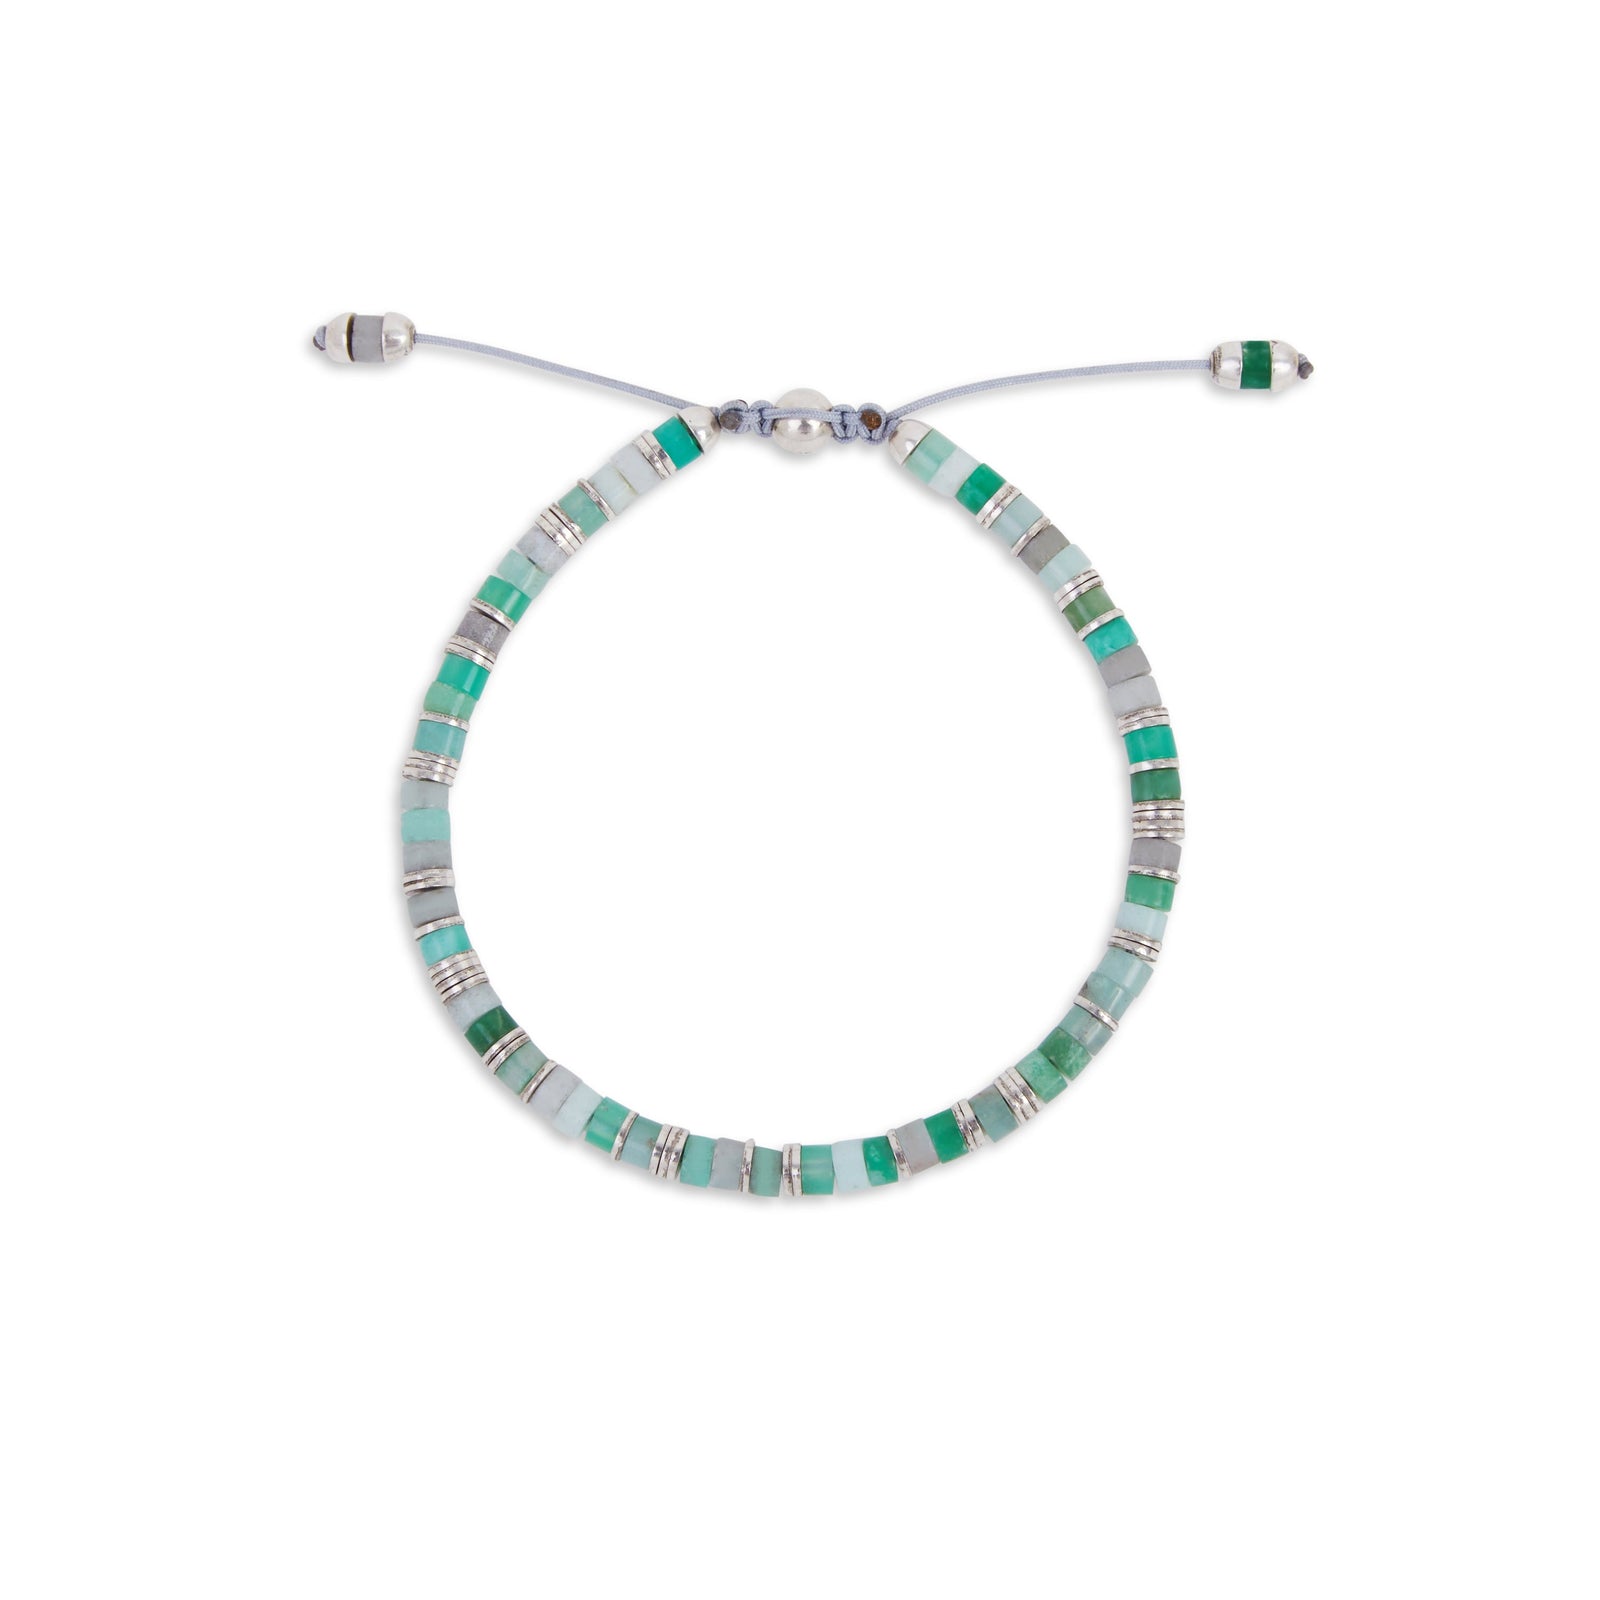 MAOR M.Cohen tucson bracelet in sterling silver and chrysoprase